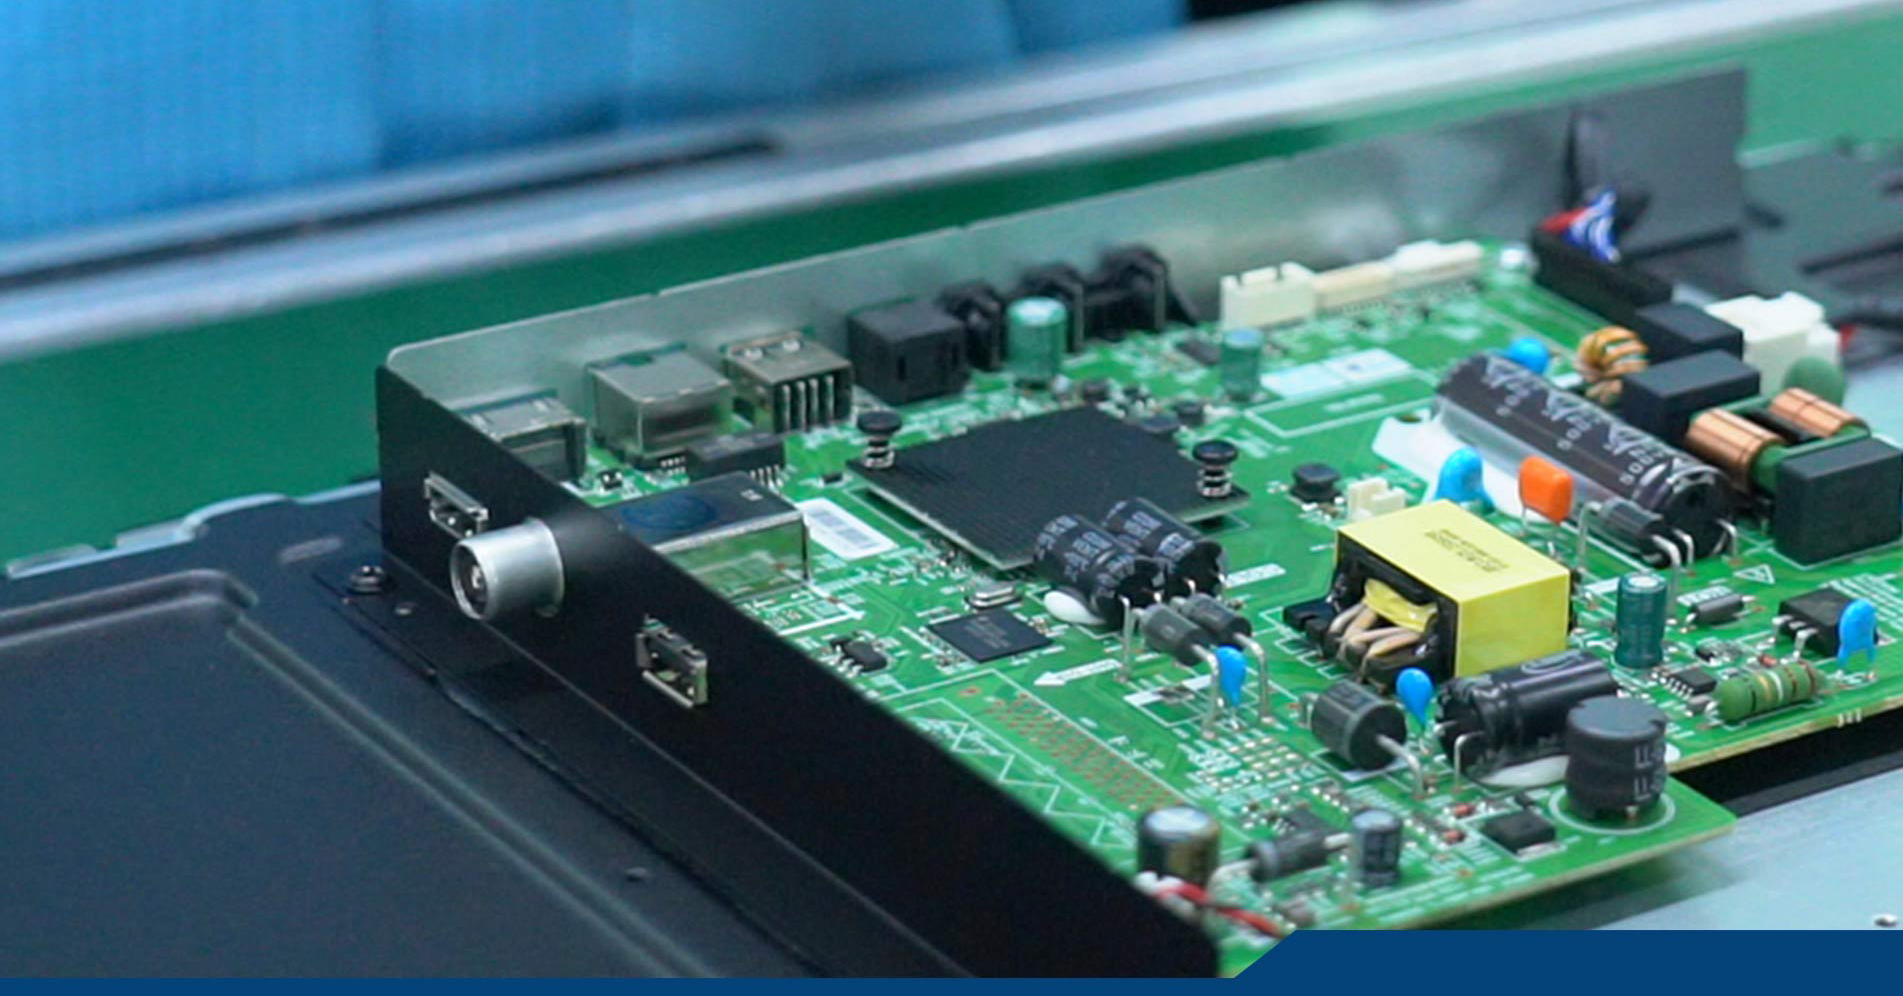 Electronics Manufacturers in India